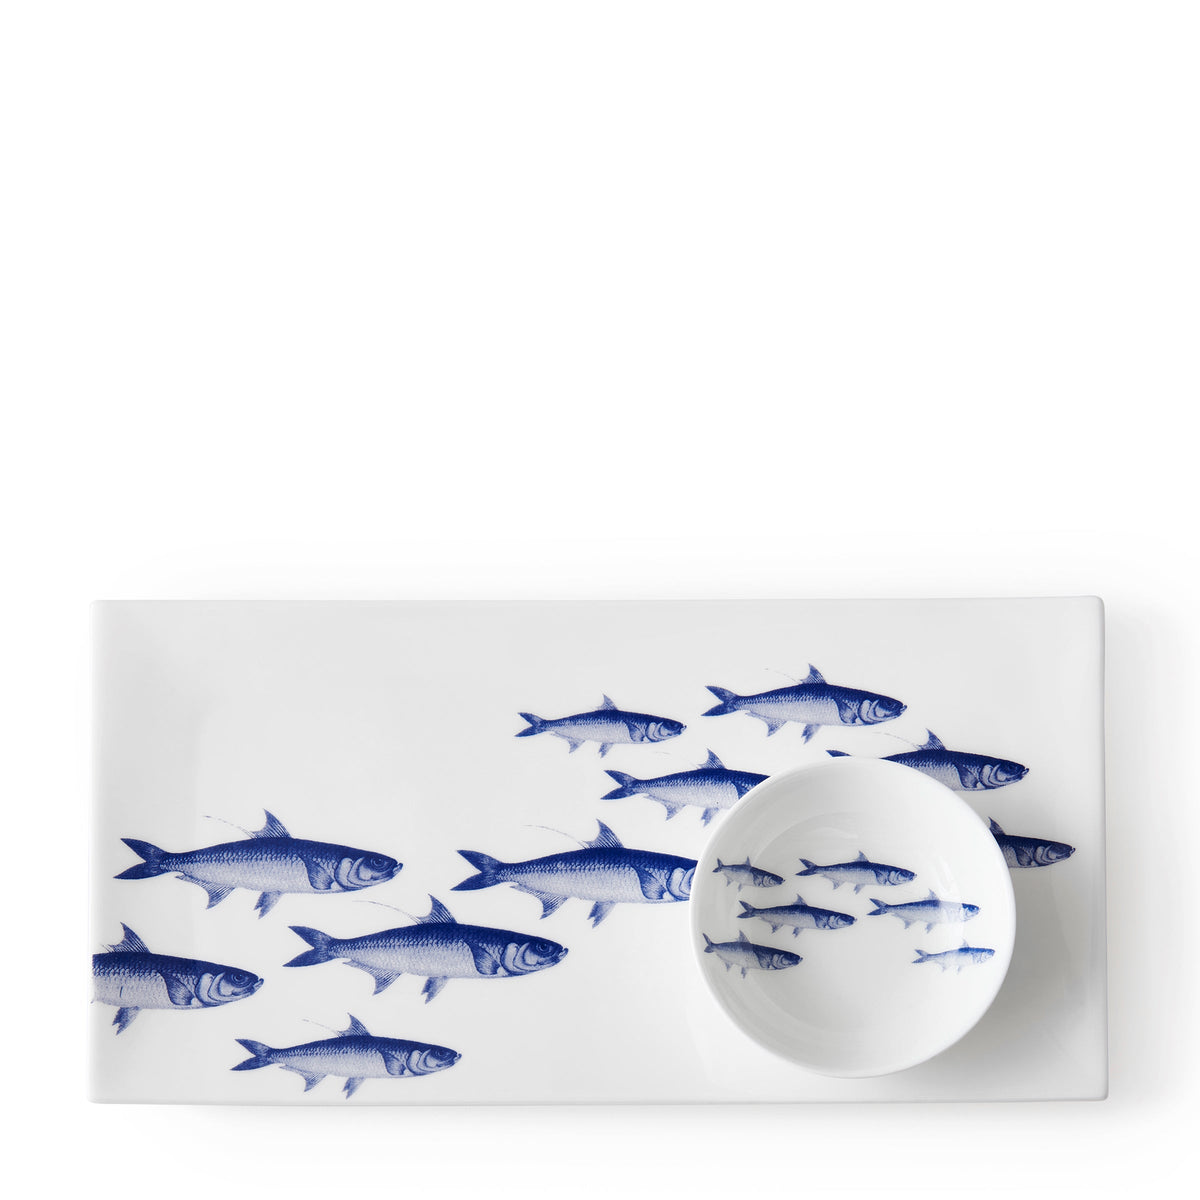 Rectangular white platter with blue fish illustrations, perfect for serving appetizers, accompanied by a small white bowl featuring matching fish images. This charming School of Fish Large Sushi Tray by Caskata adds a touch of elegance to any gathering.